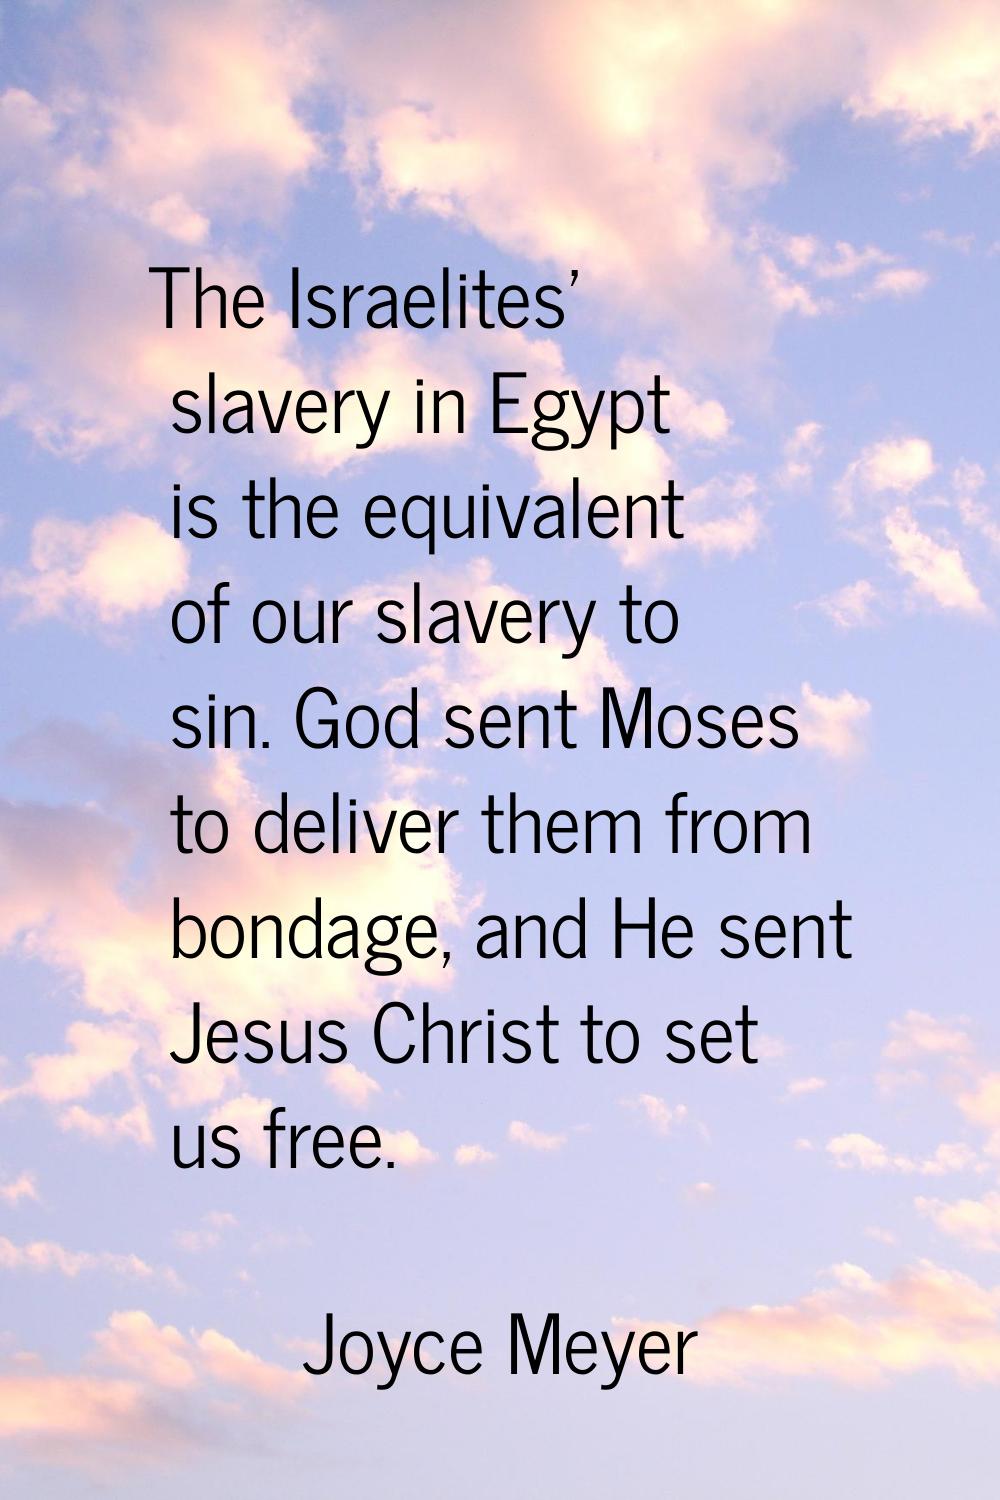 The Israelites' slavery in Egypt is the equivalent of our slavery to sin. God sent Moses to deliver